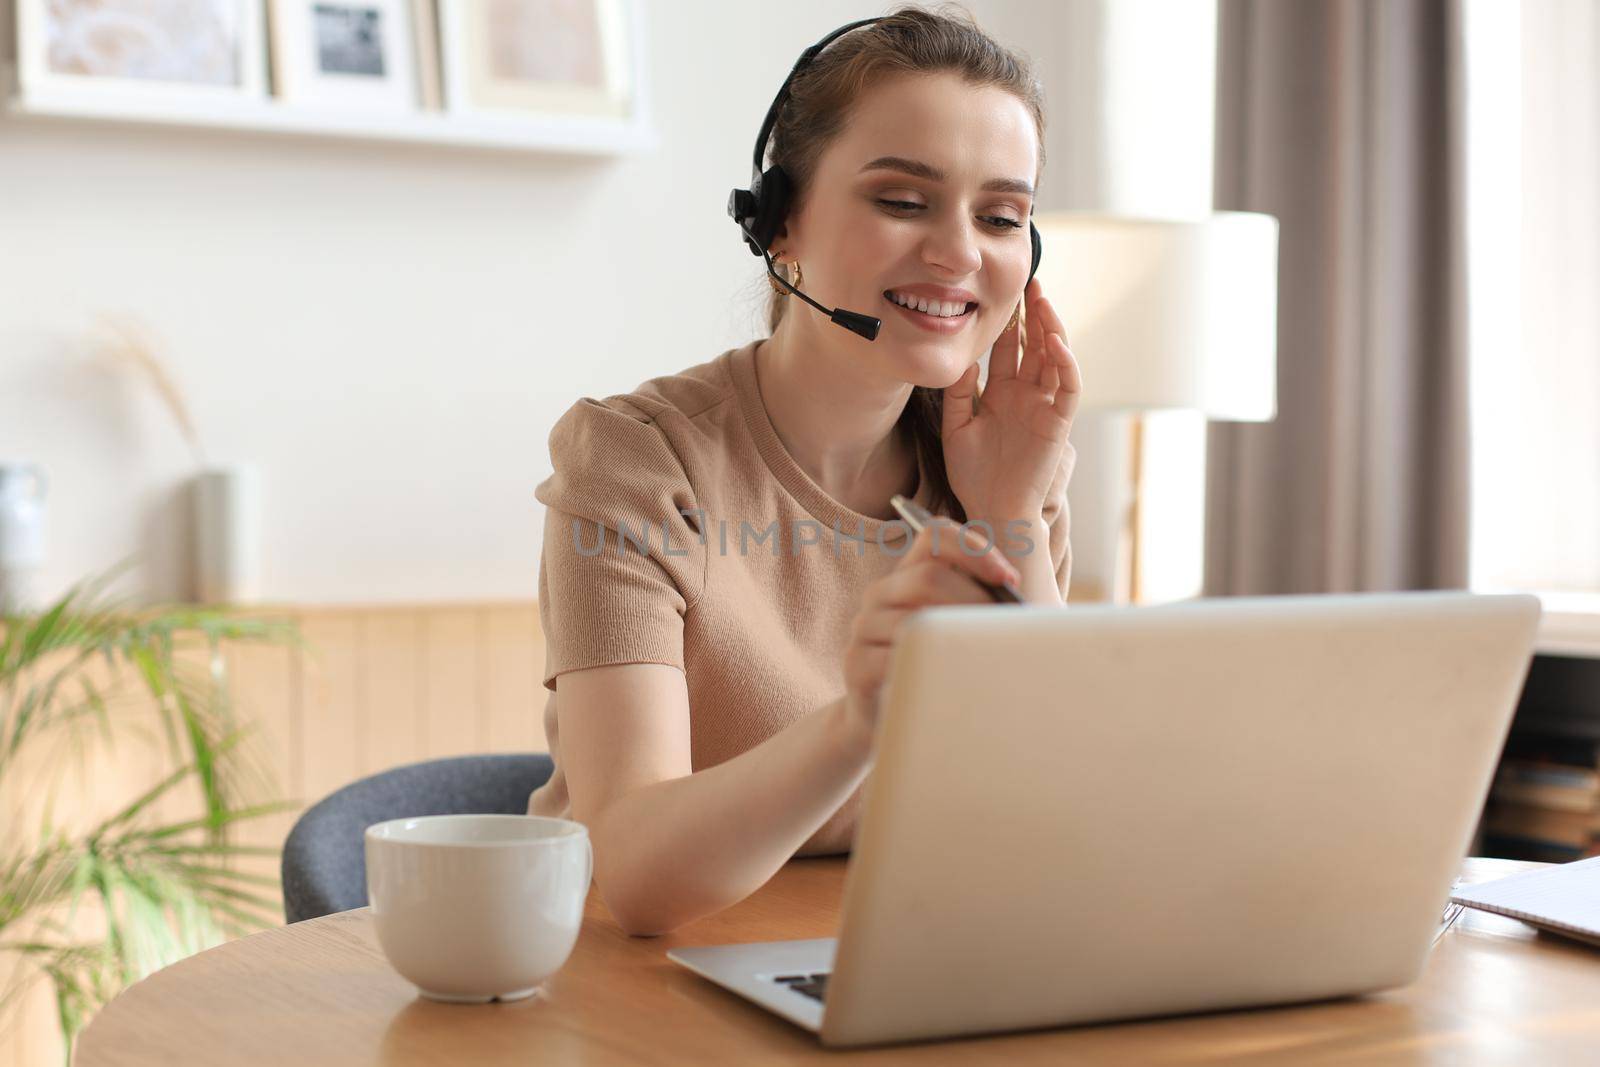 Freelance operator talking with headsets and consulting clients from home office